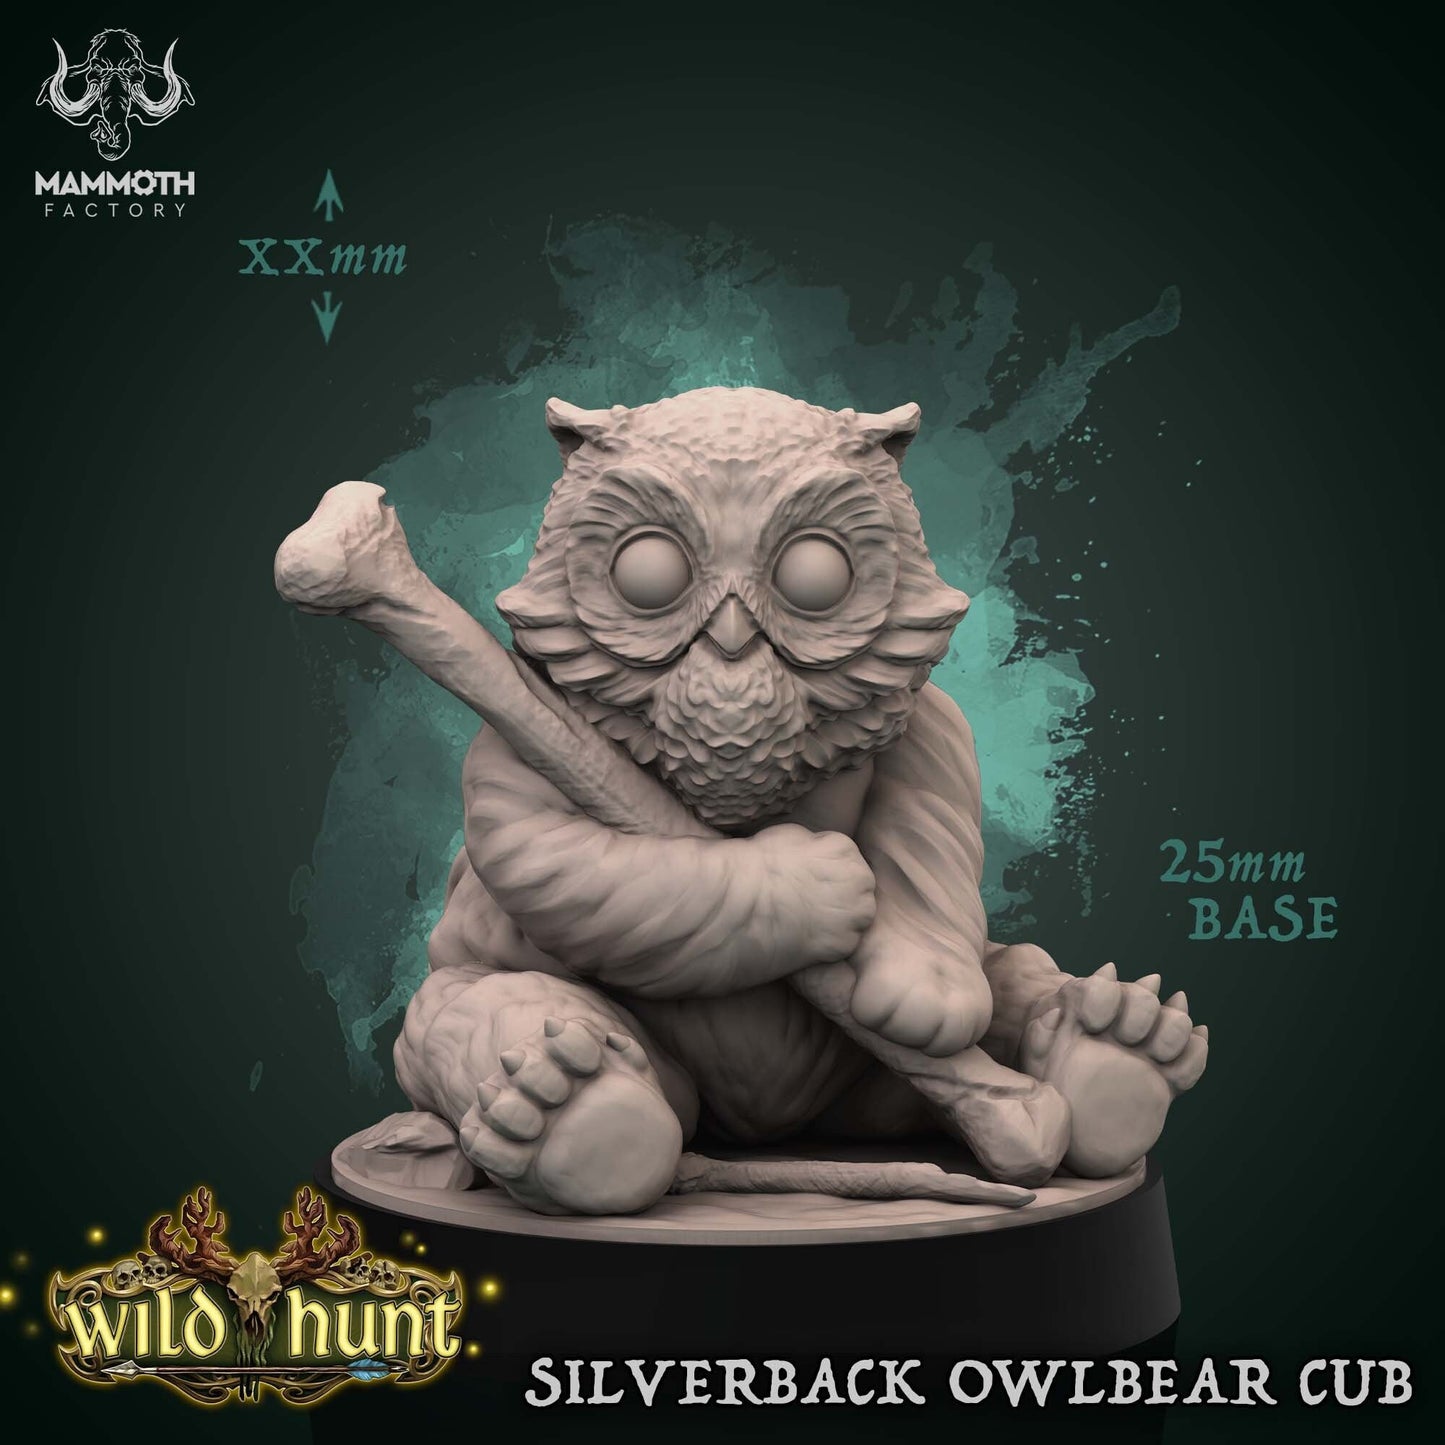 Silverback Owlbear Cub | Mammoth Factory | 3D Printed Resin Miniature | Dungeons and Dragons | Pathfinder | Tabletop Role Playing | AoS |D&D